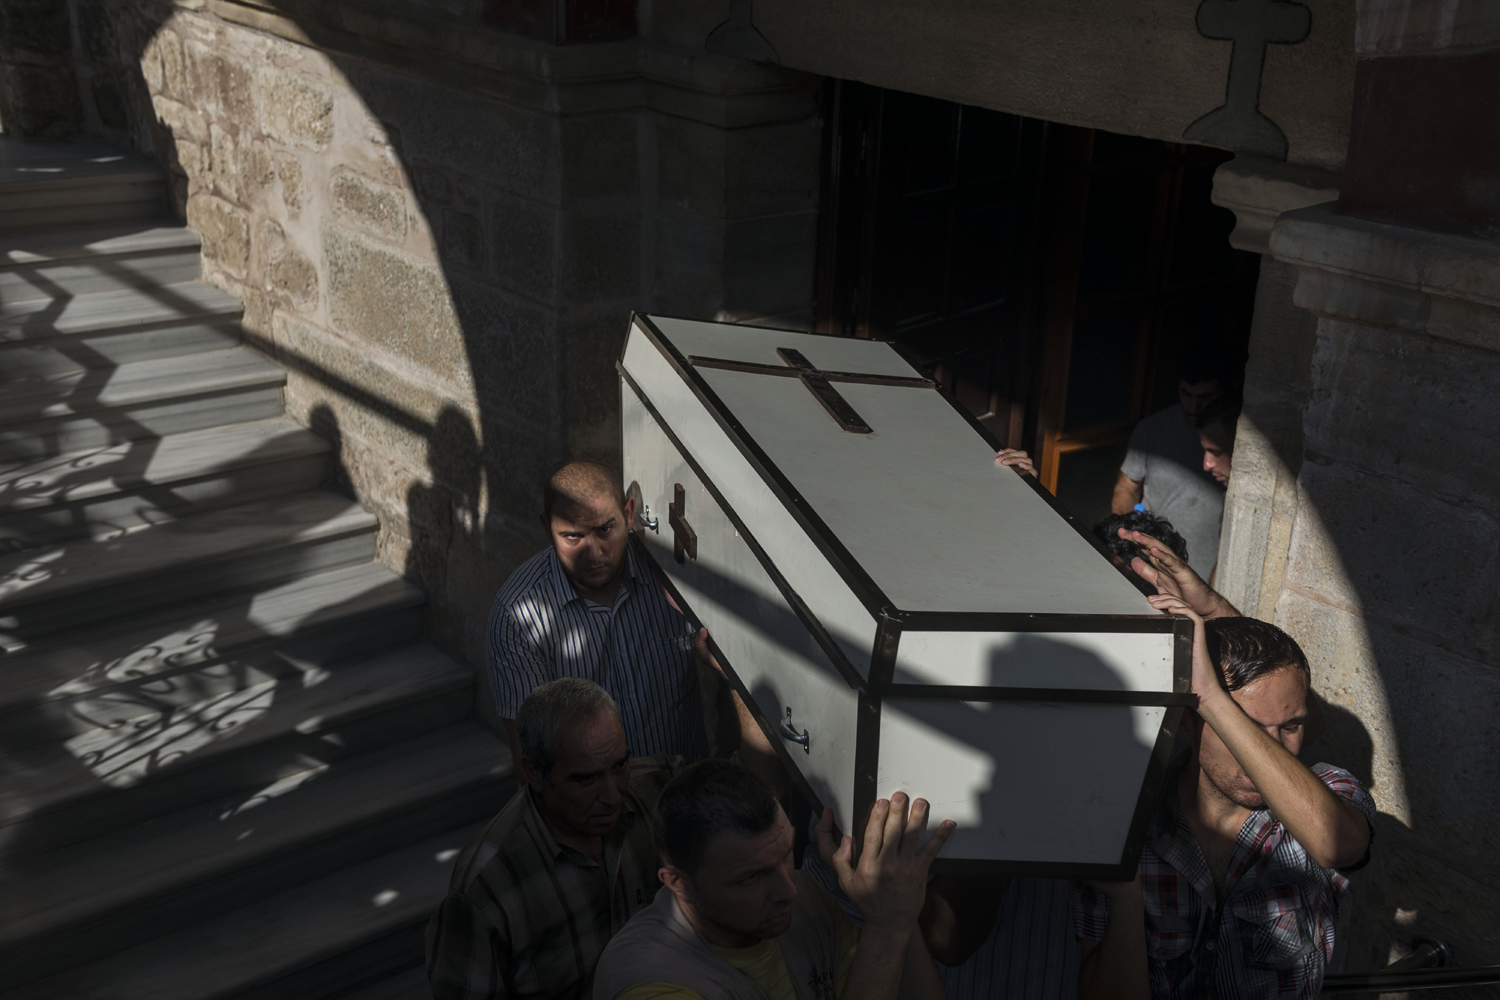 Relatives of Jalila Ayyad, a Christian woman who was reportedly killed during an airstrike, carry her coffin during her funeral at the Church of Saint Porphyrius.